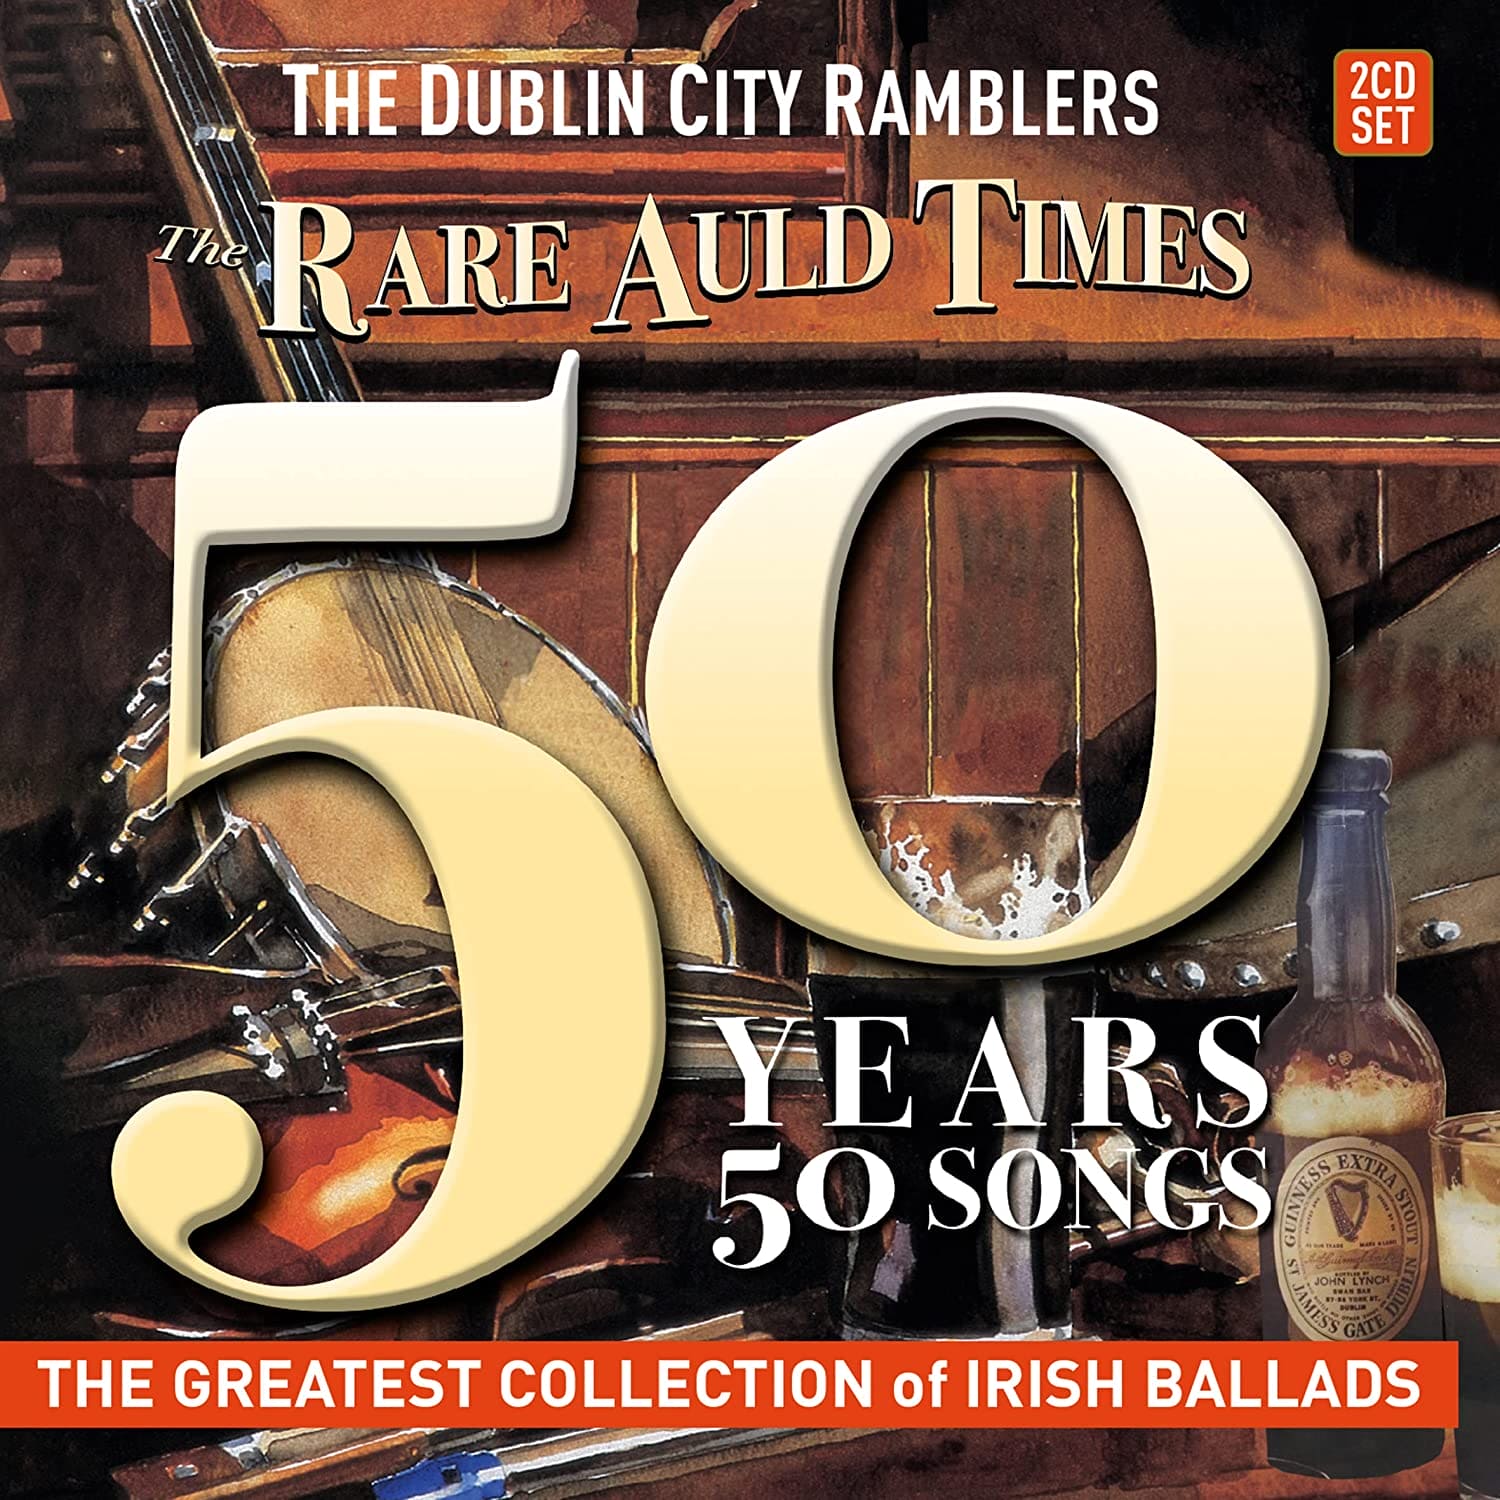 50 Years 50 Songs (The Rare Auld Times) - The Dublin City Ramblers [2CD]